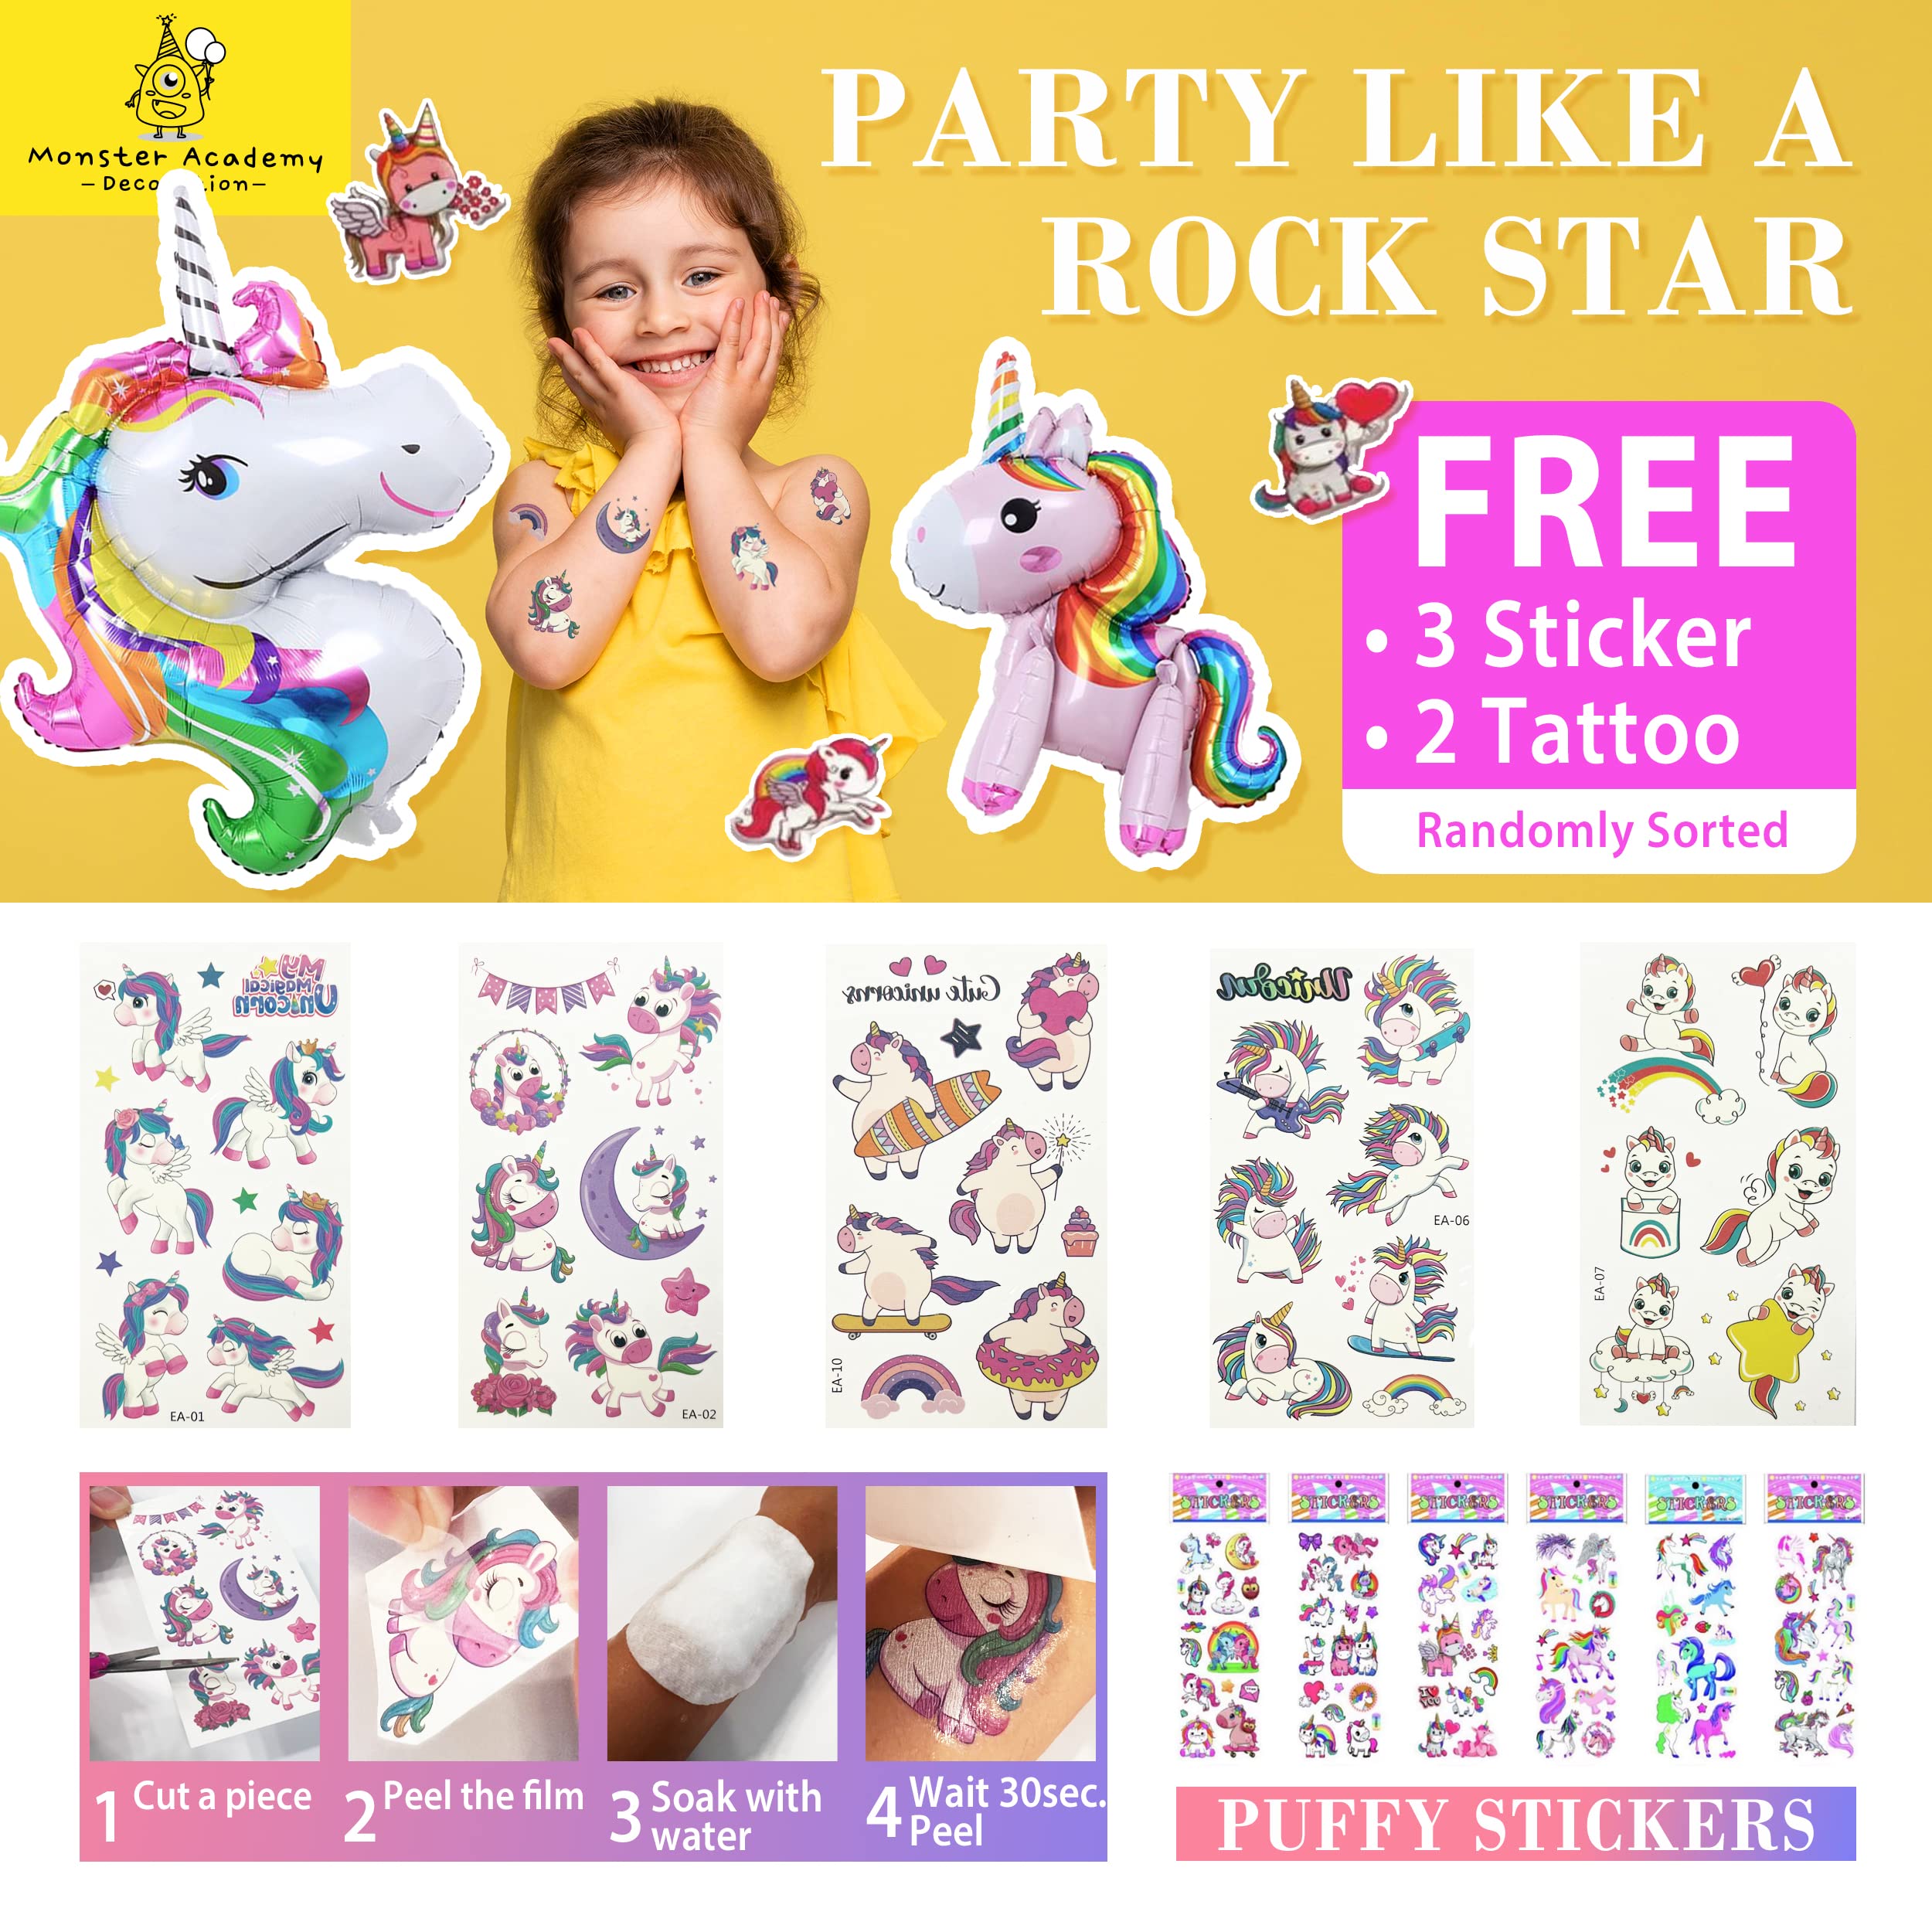 UNICORN BIRTHDAY DECORATIONS FOR GIRLS: Wearable Butterfly Wing, Warm Butter Pastel Balloon Garland, HUGE FOIL Balloon, Balloon Pump (thank me later), Magical Girl's Birthday Decorations.